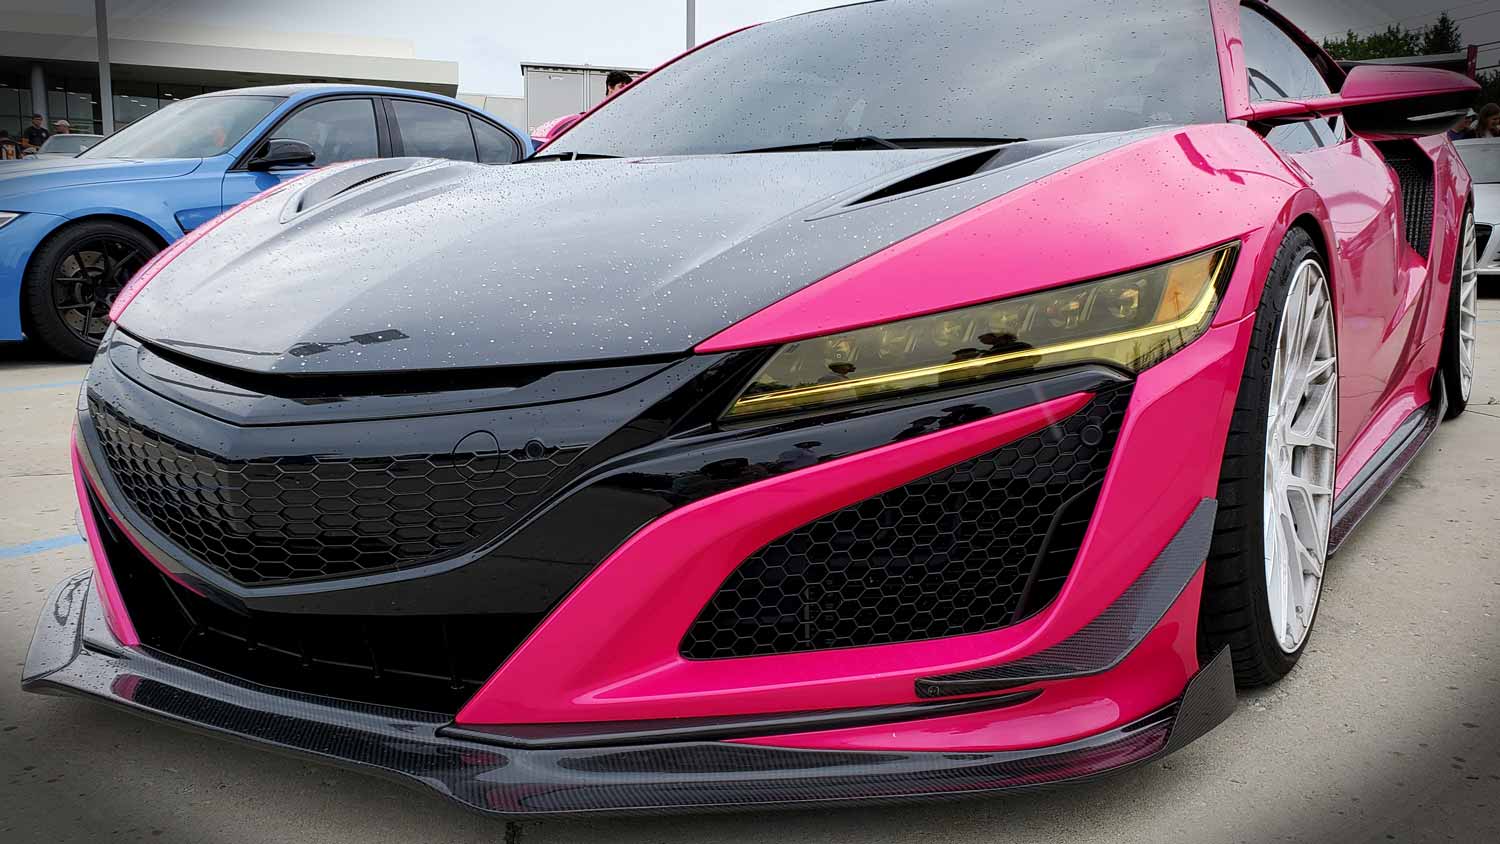 Carbon fiber and hot pink at Motor Werks Cars & Coffee 2021.